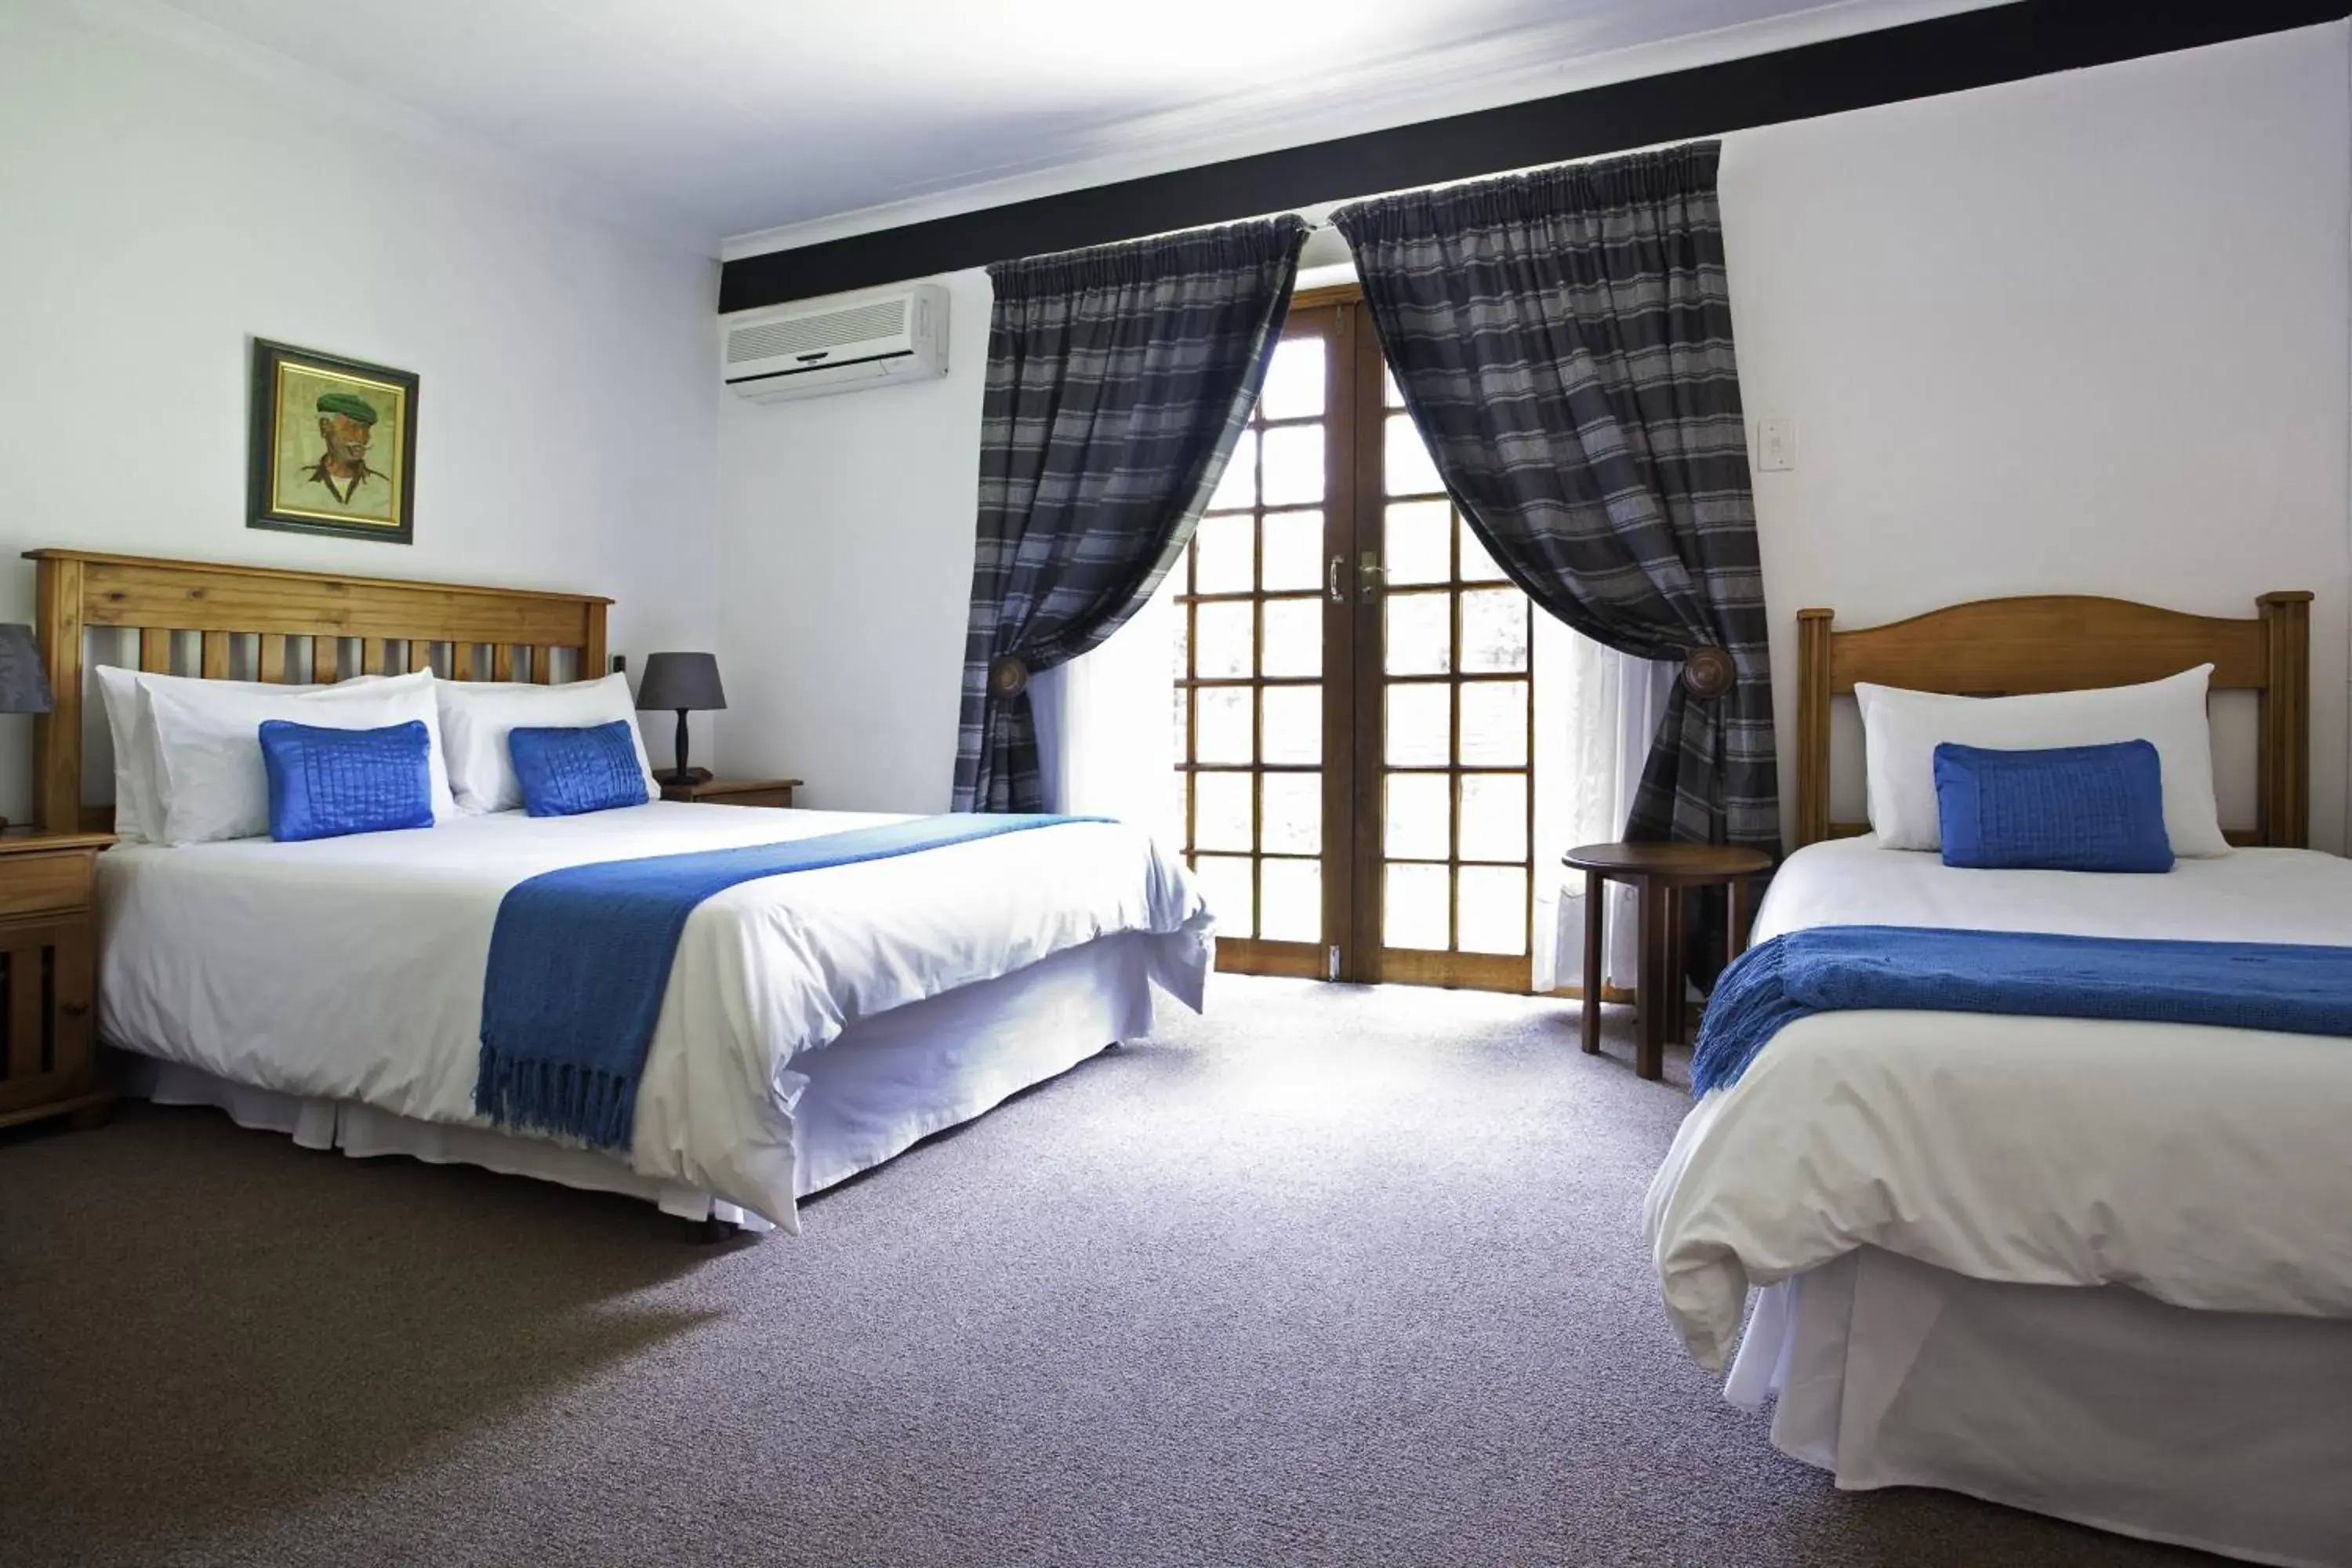  Double Room - single occupancy in Peter's Guesthouse